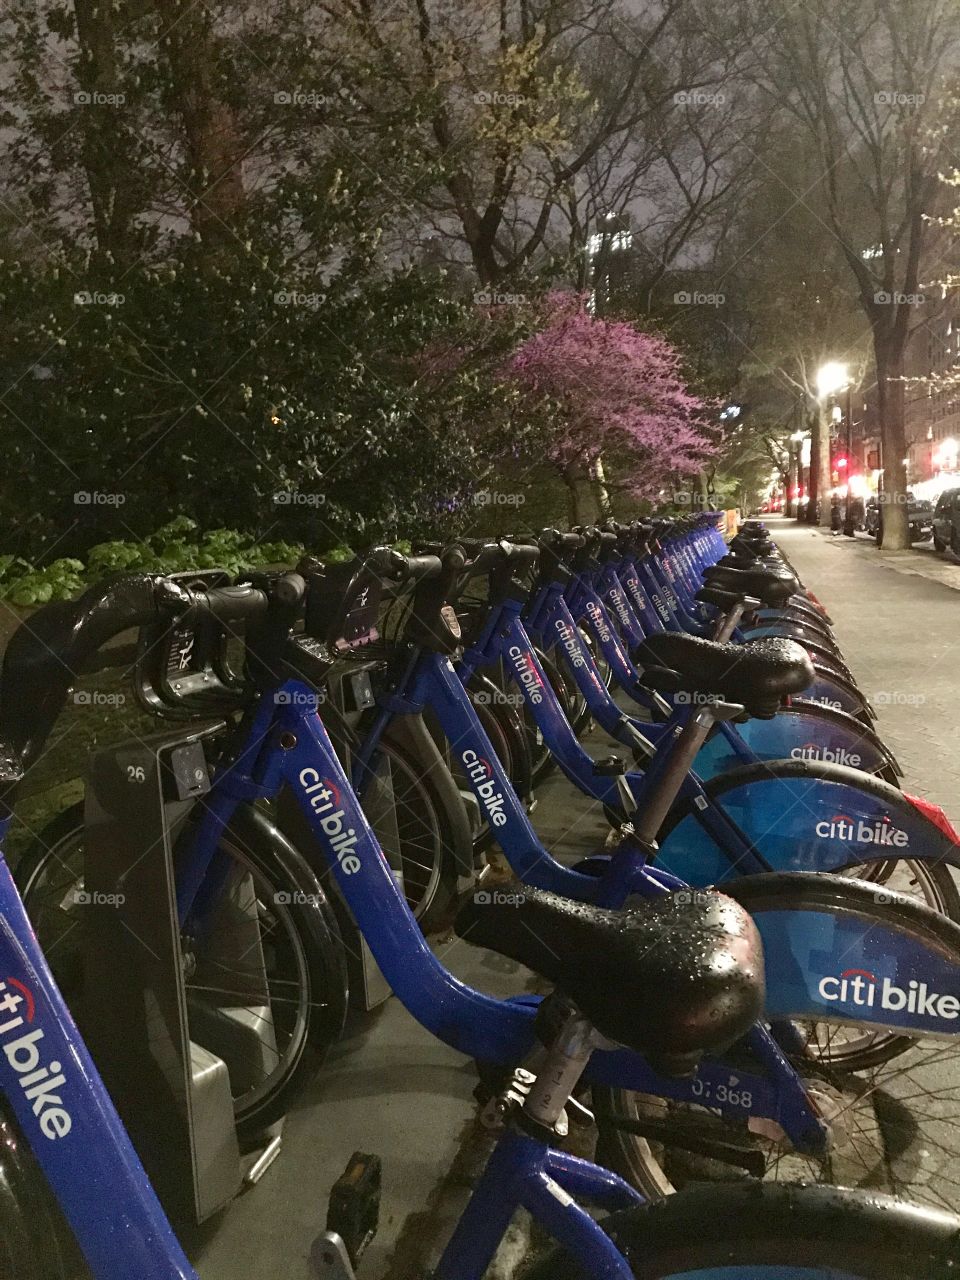 Citi bikes by the Central Park, NYC 